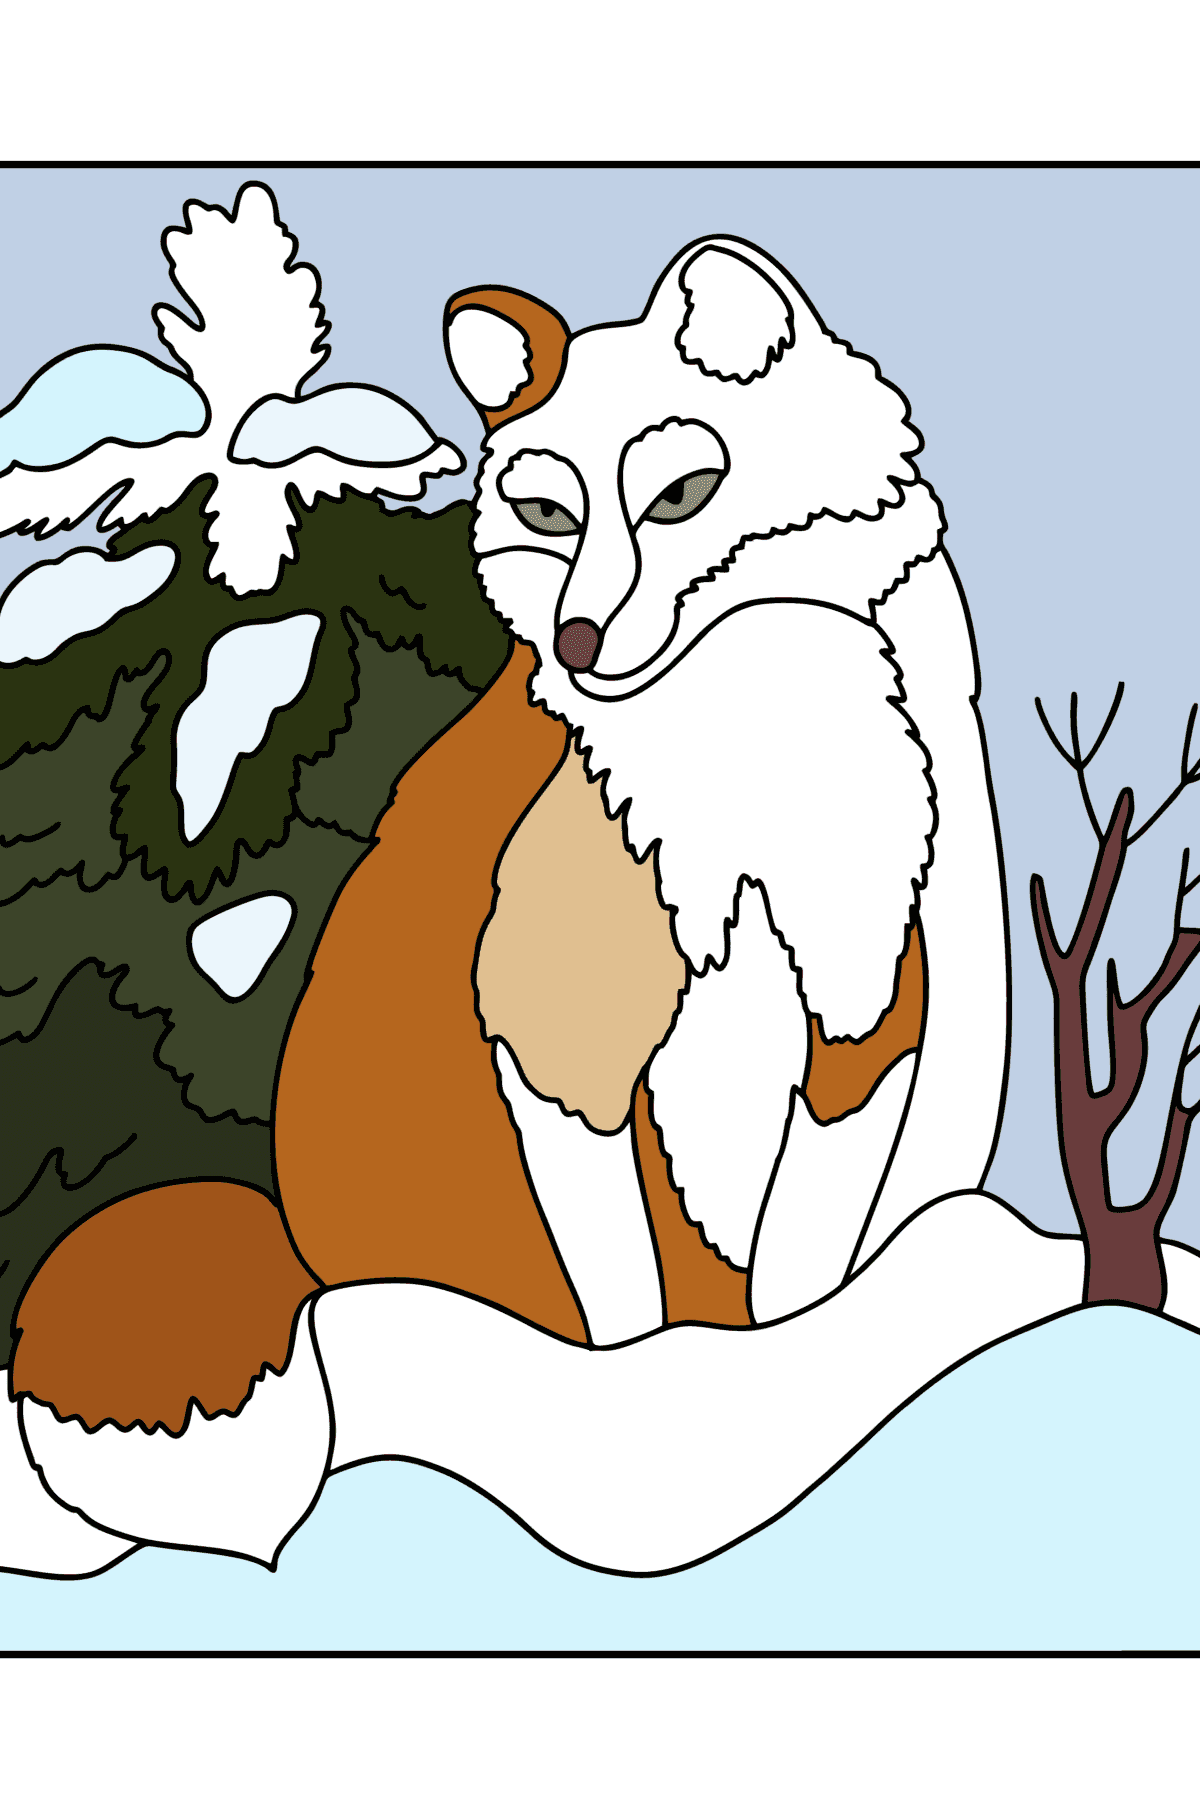 Fox in the snow сoloring page - Coloring Pages for Kids